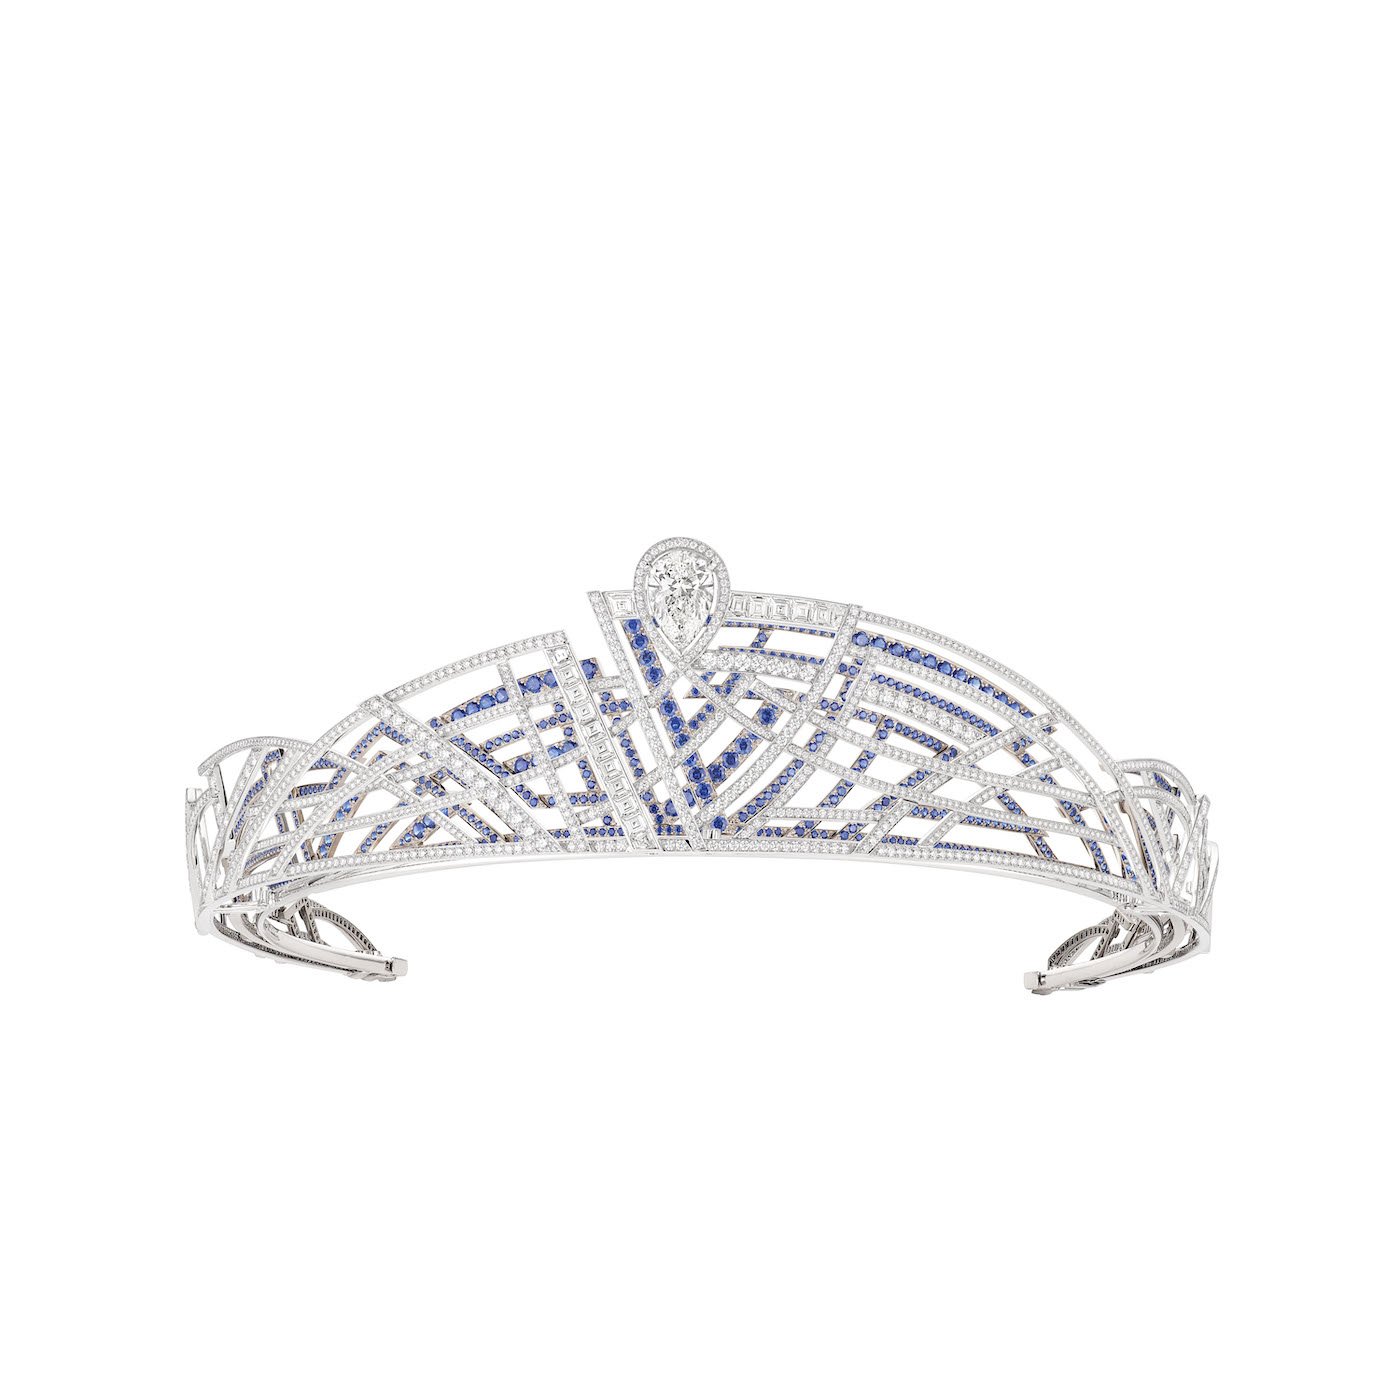 Chaumet in Majesty: Tiaras (and More!)